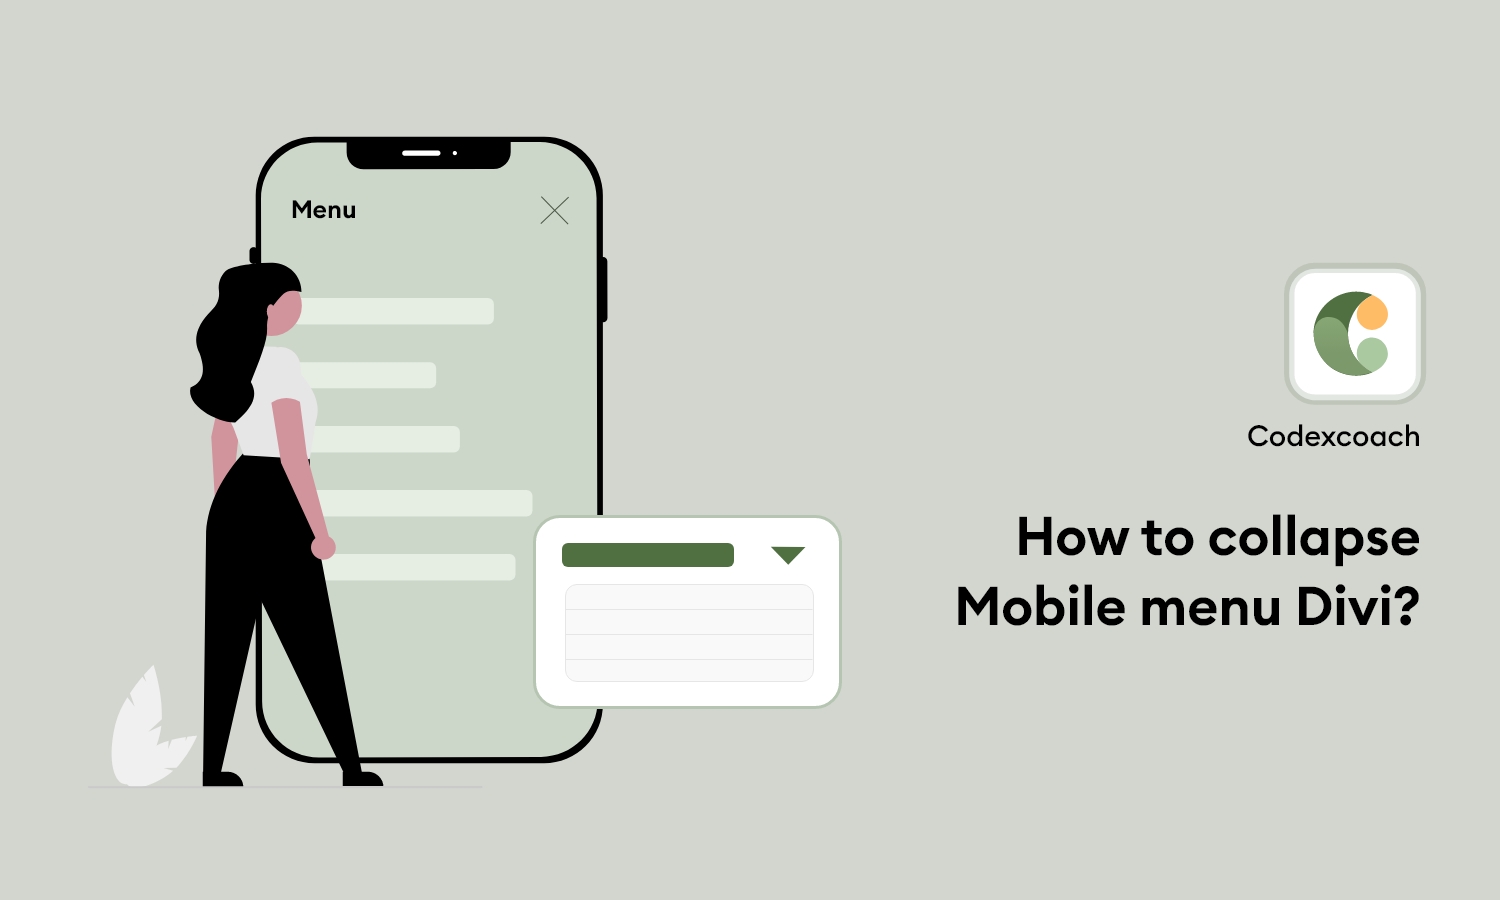 How to collapse Mobile menu Divi